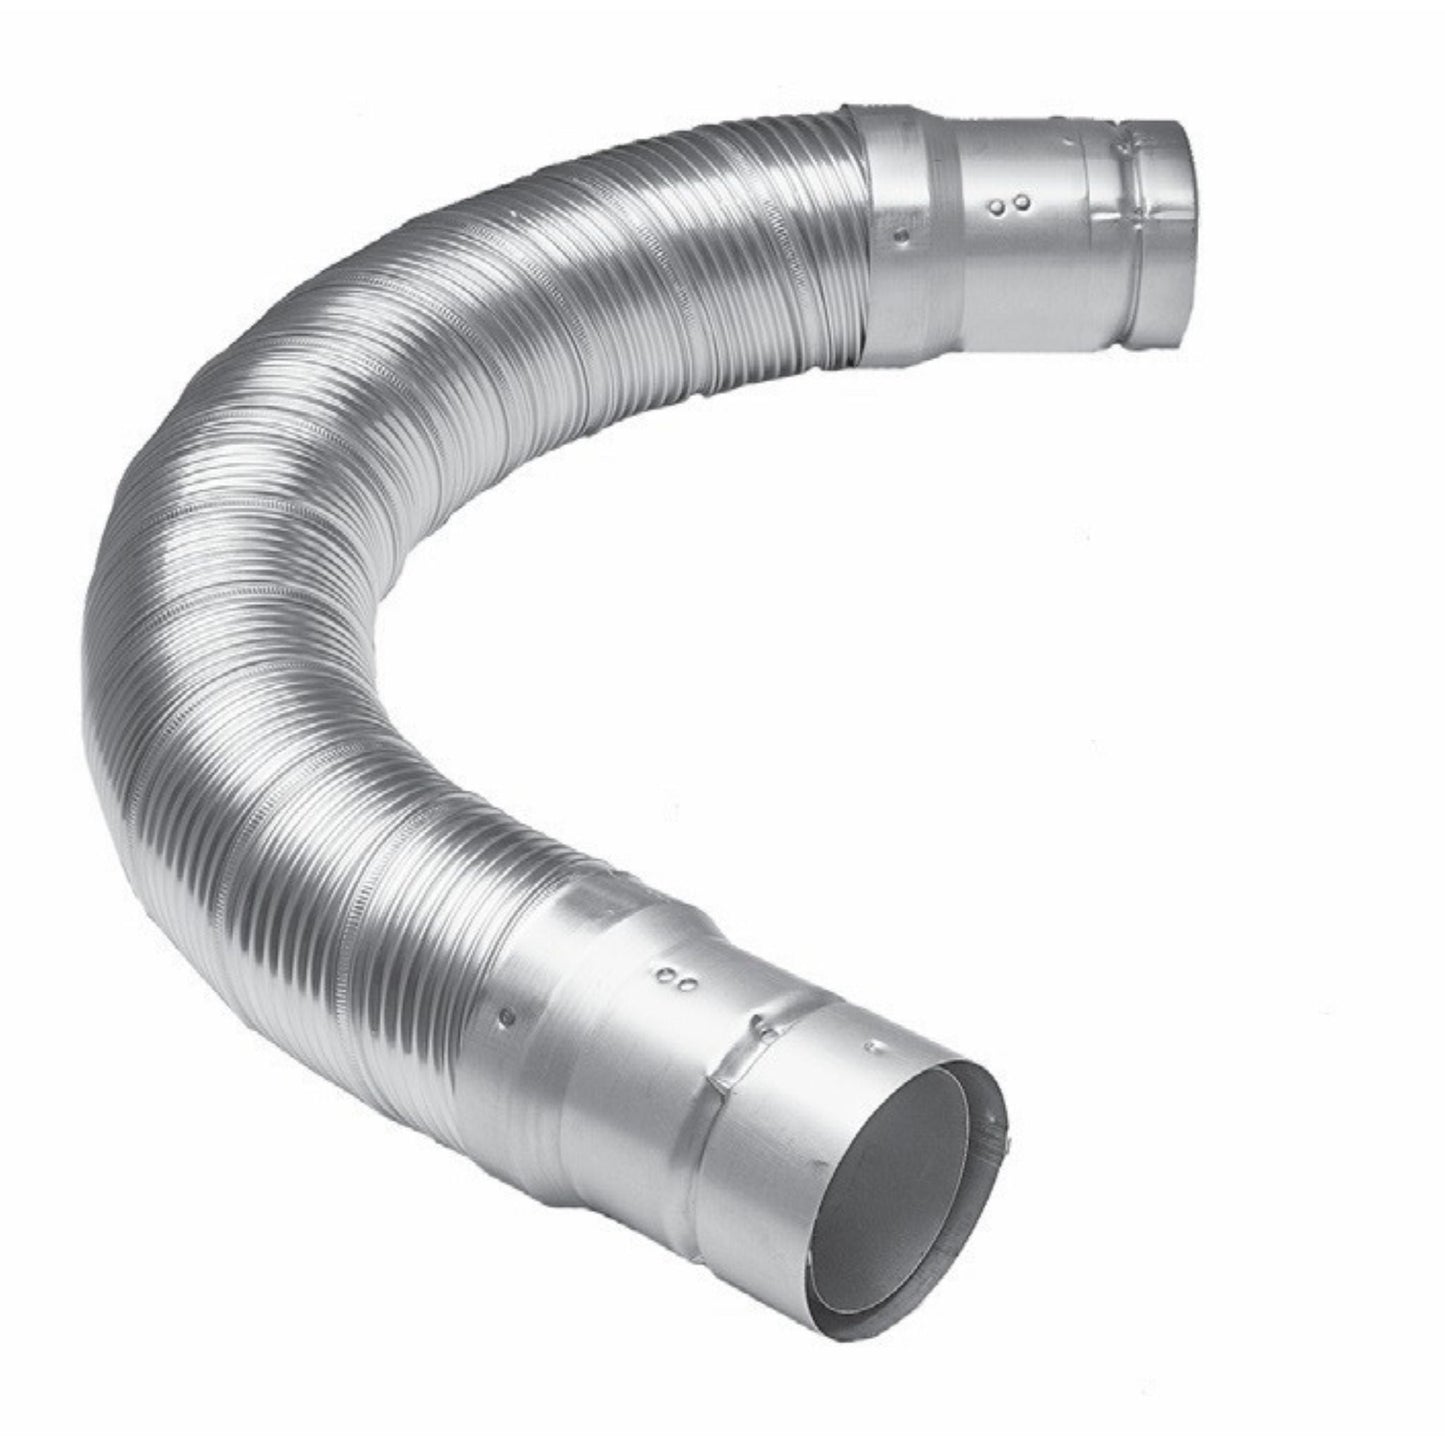 DuraVent DuraConnect II B-Vent 4" x 48" Flexible Double-Wall Gas Vent Connector